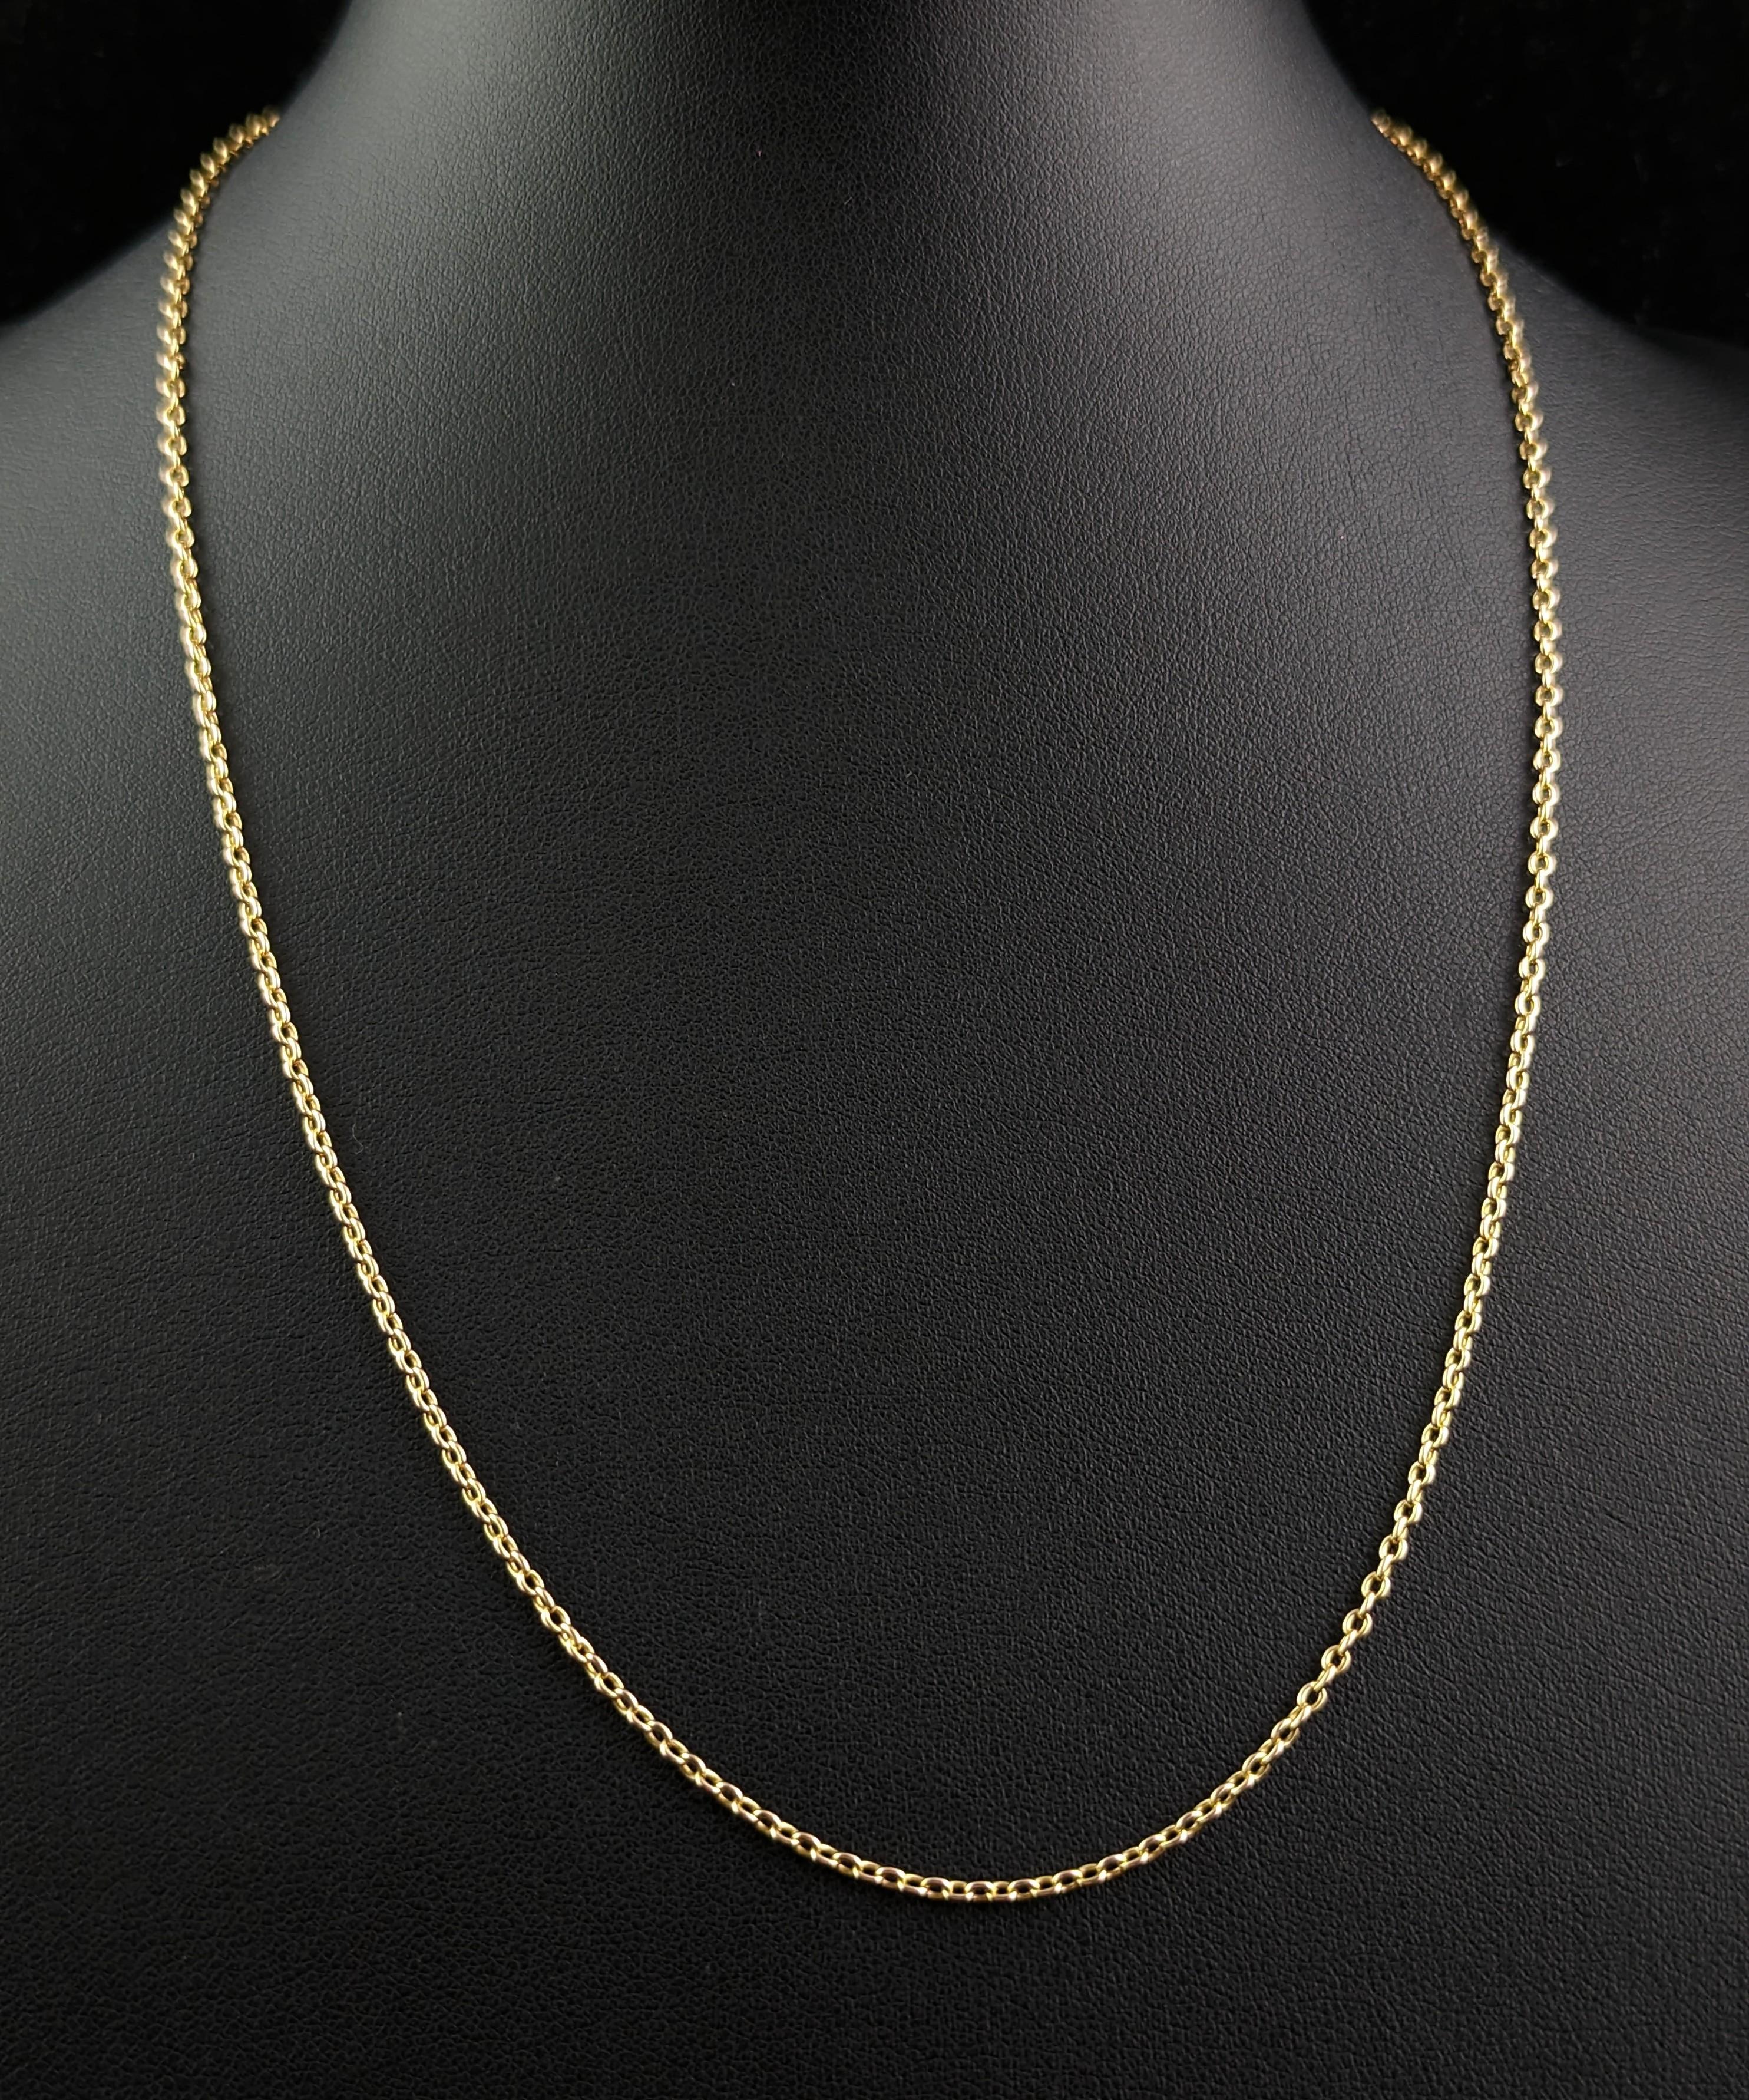 Antique 15k Yellow Gold Chain Necklace, Rolo Link 3